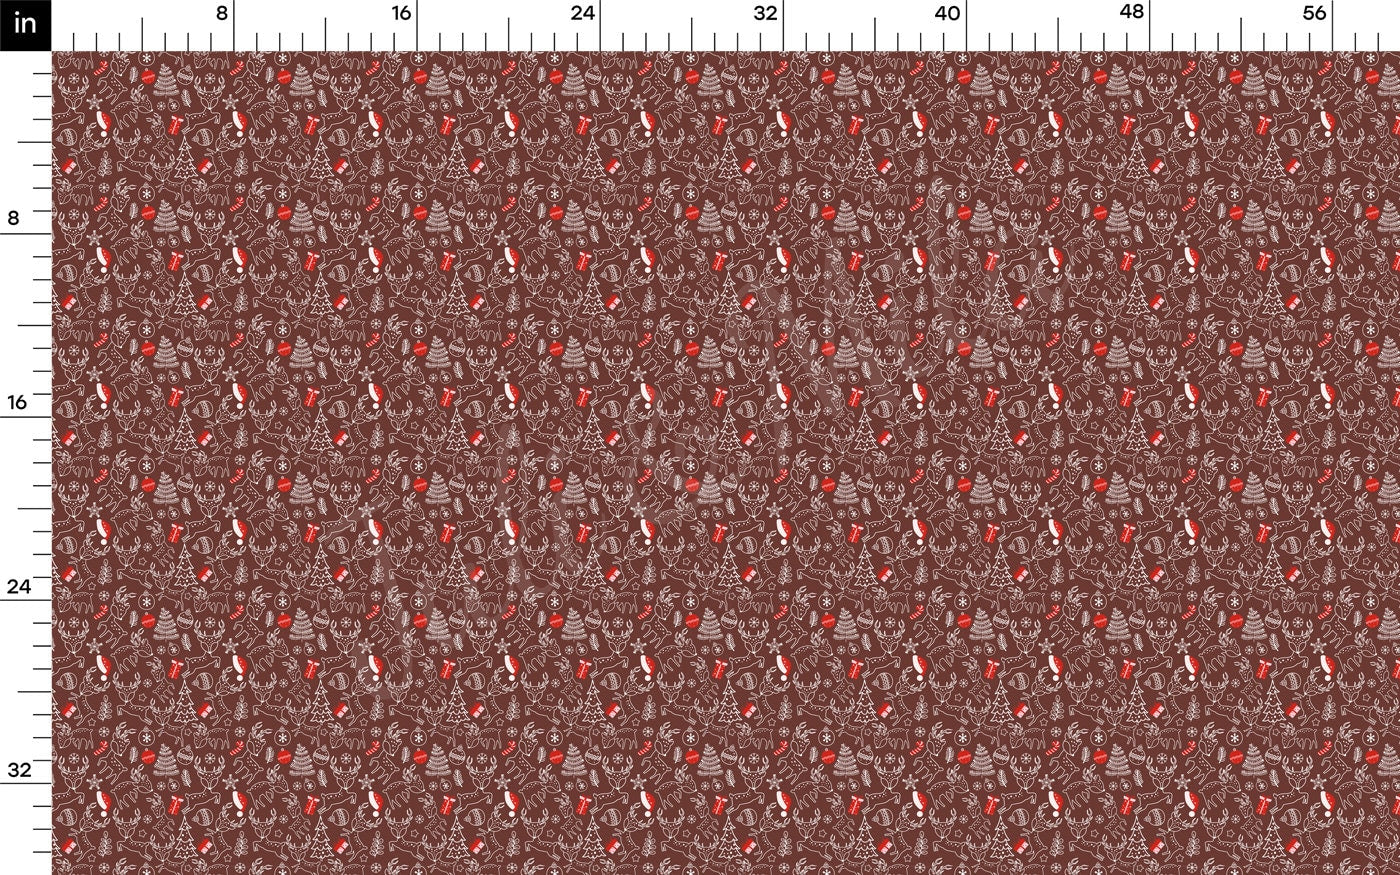 Christmas DBP Fabric Double Brushed Polyester DBP2164